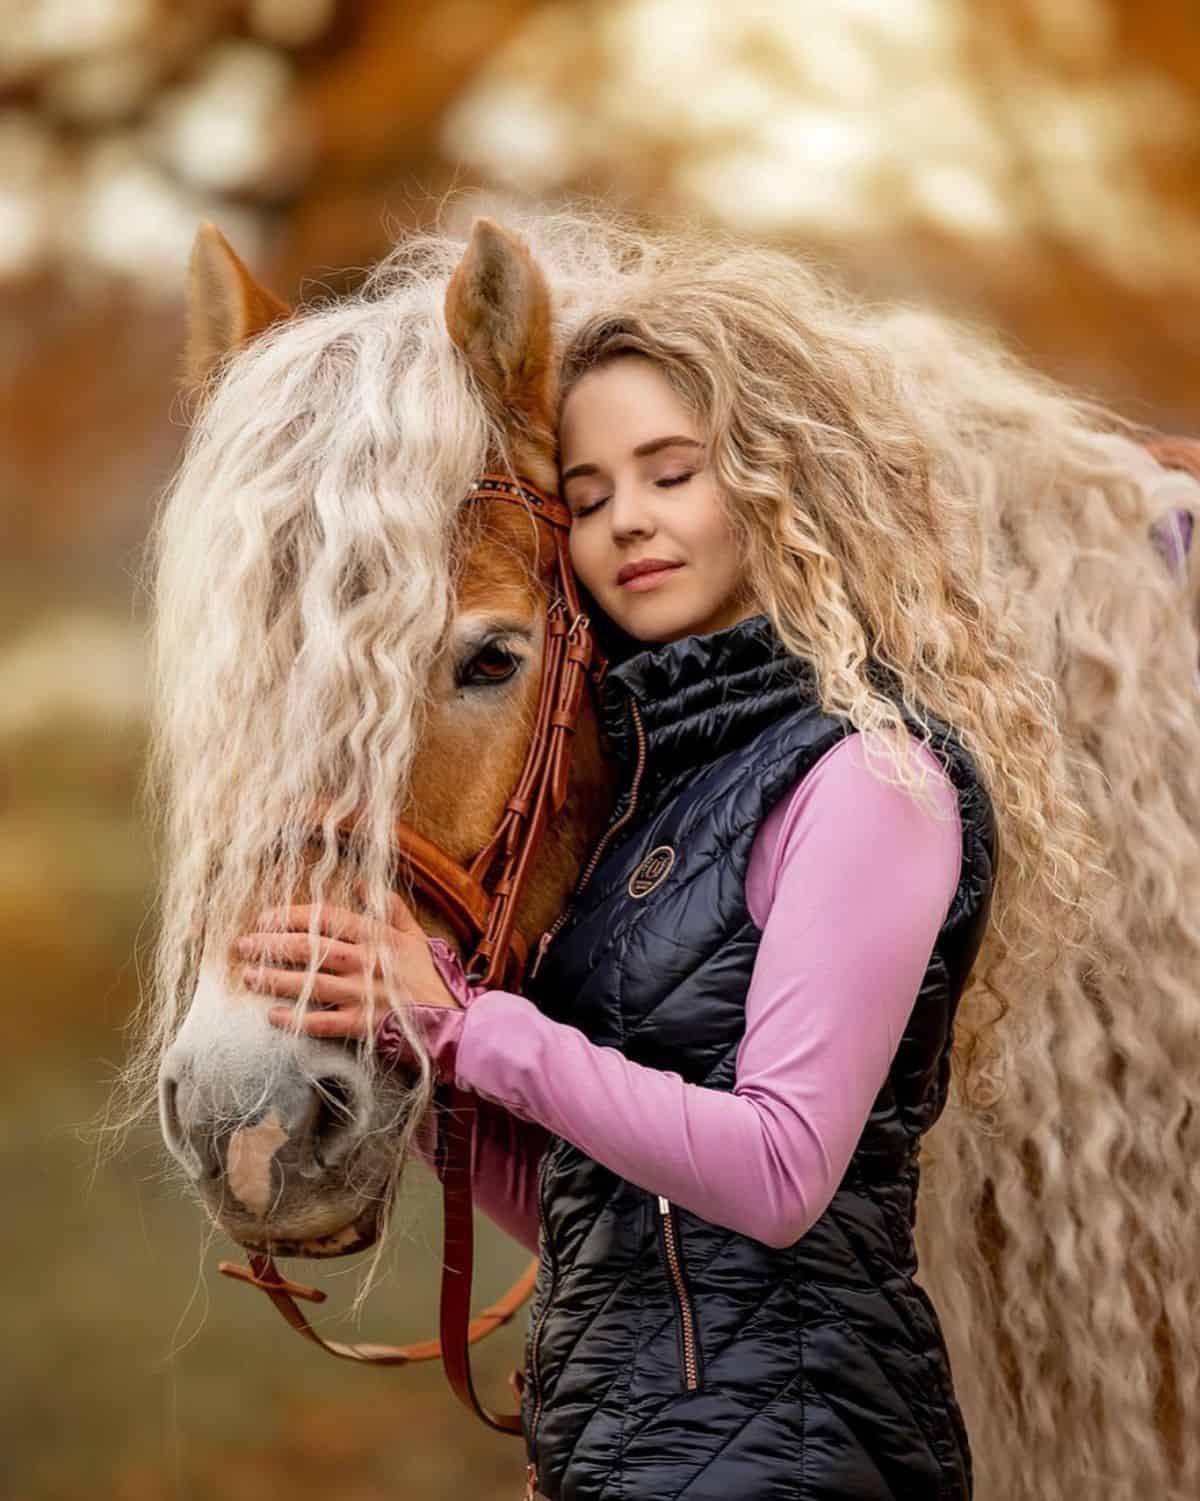 A young woman pets a brown horse with a curly mane.